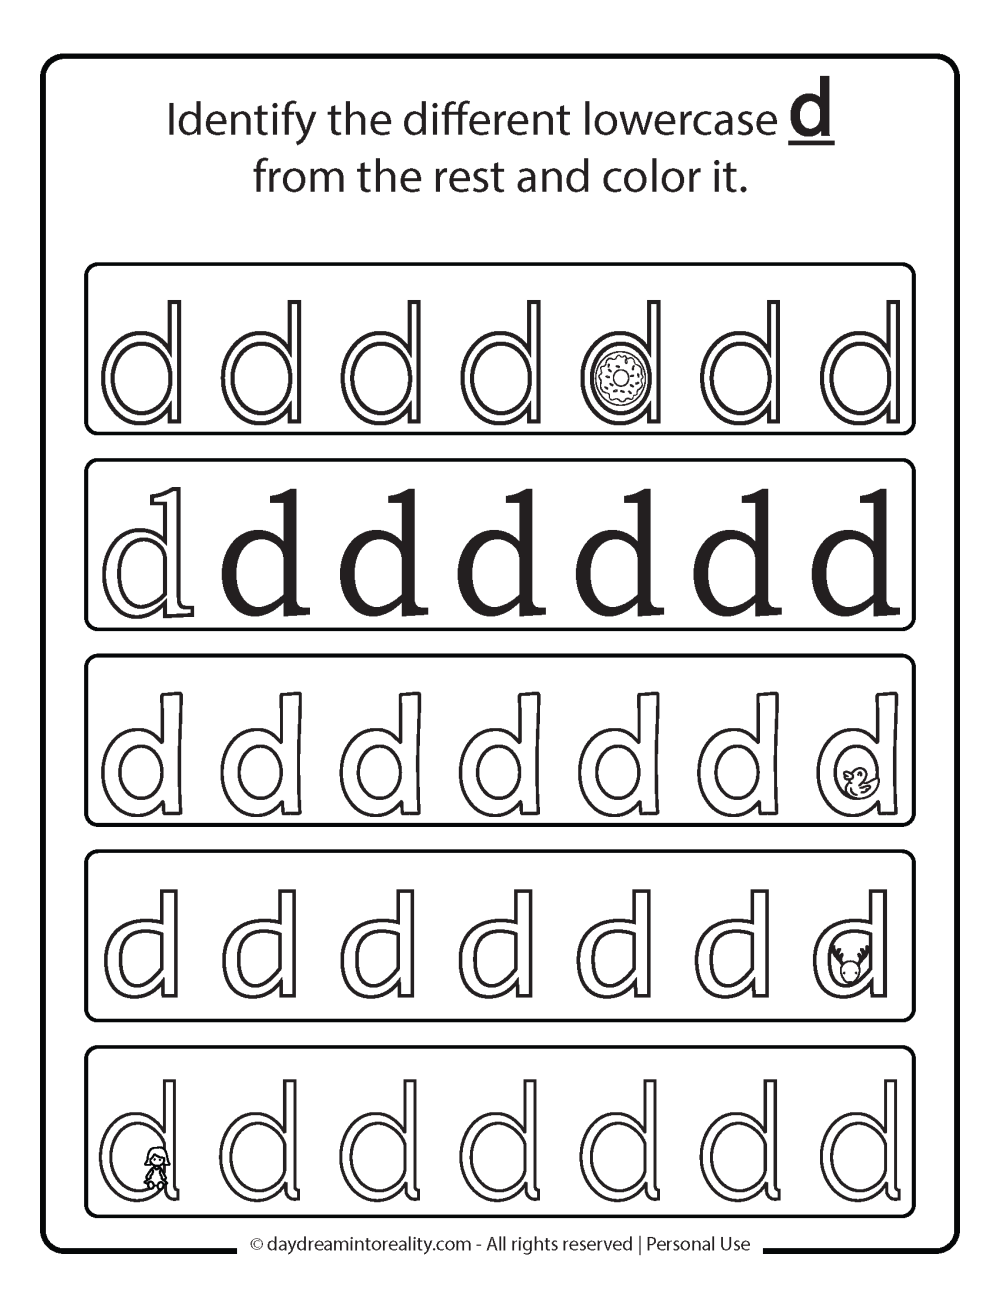 Letter D worksheet free printables. Identify the different lowercase d.